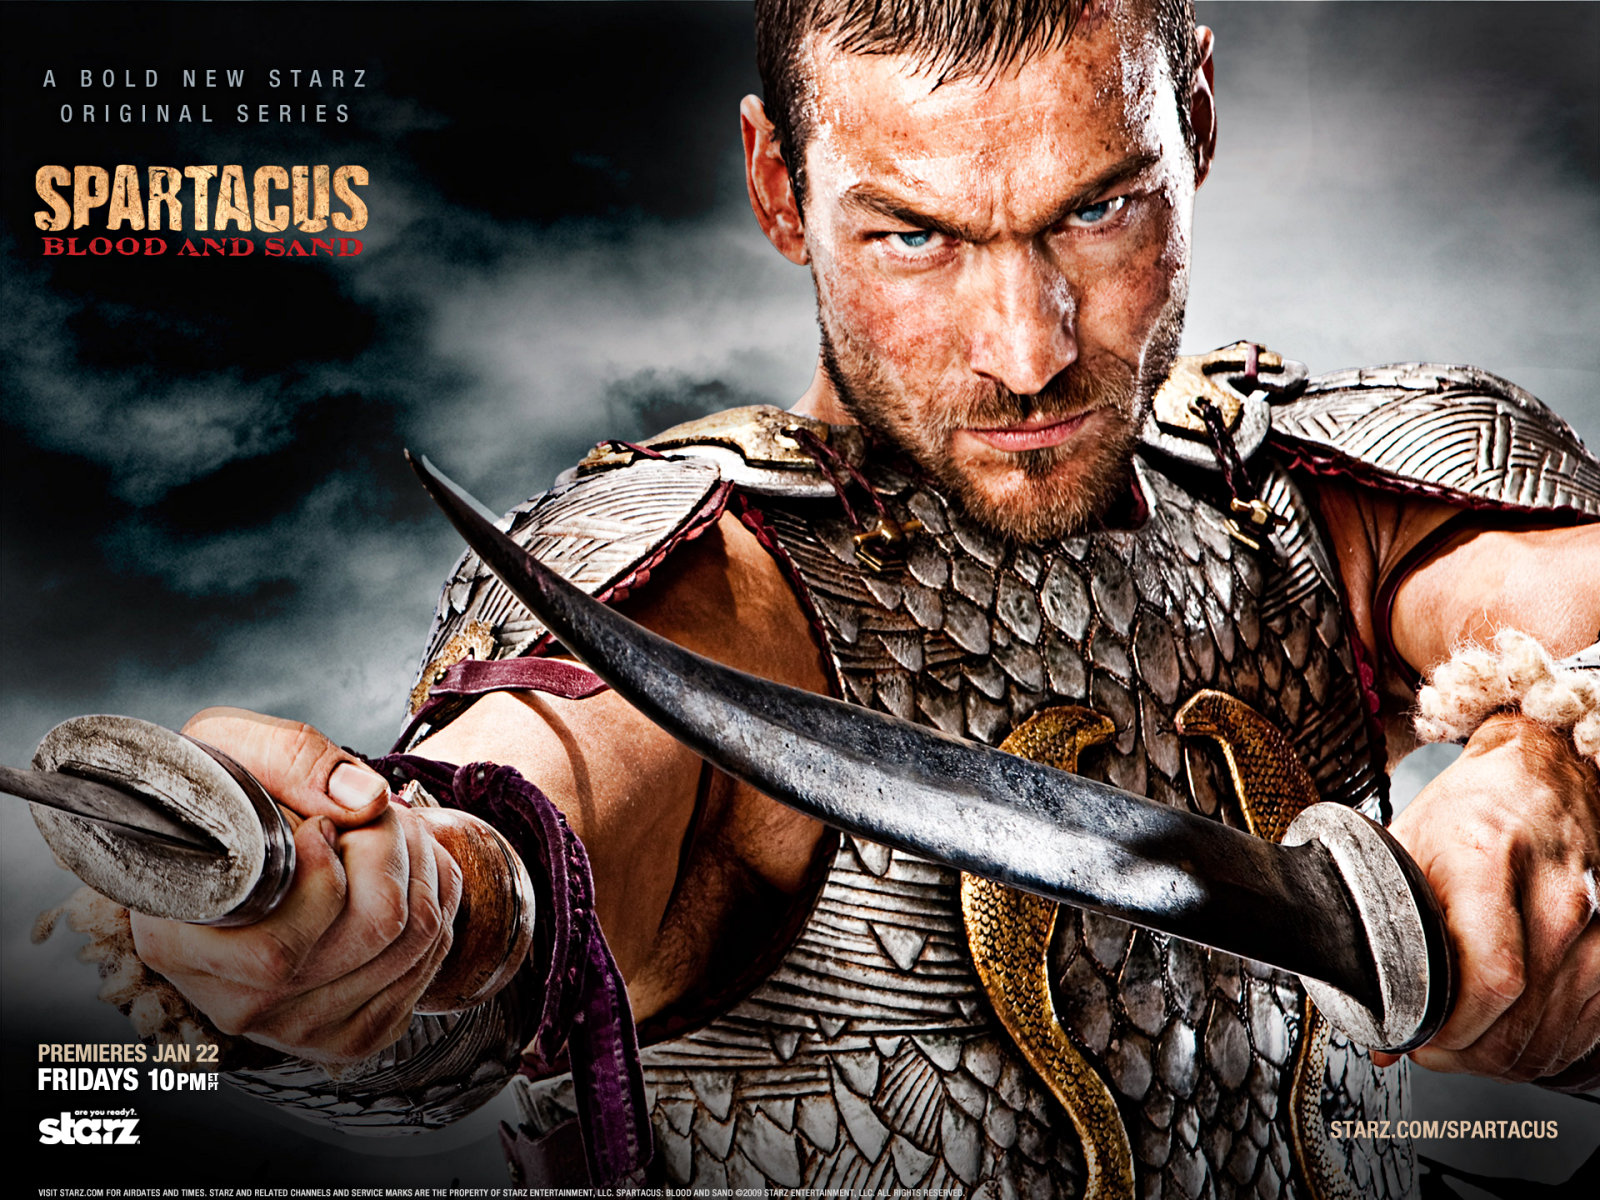 Spartacus: Blood and Sand movie